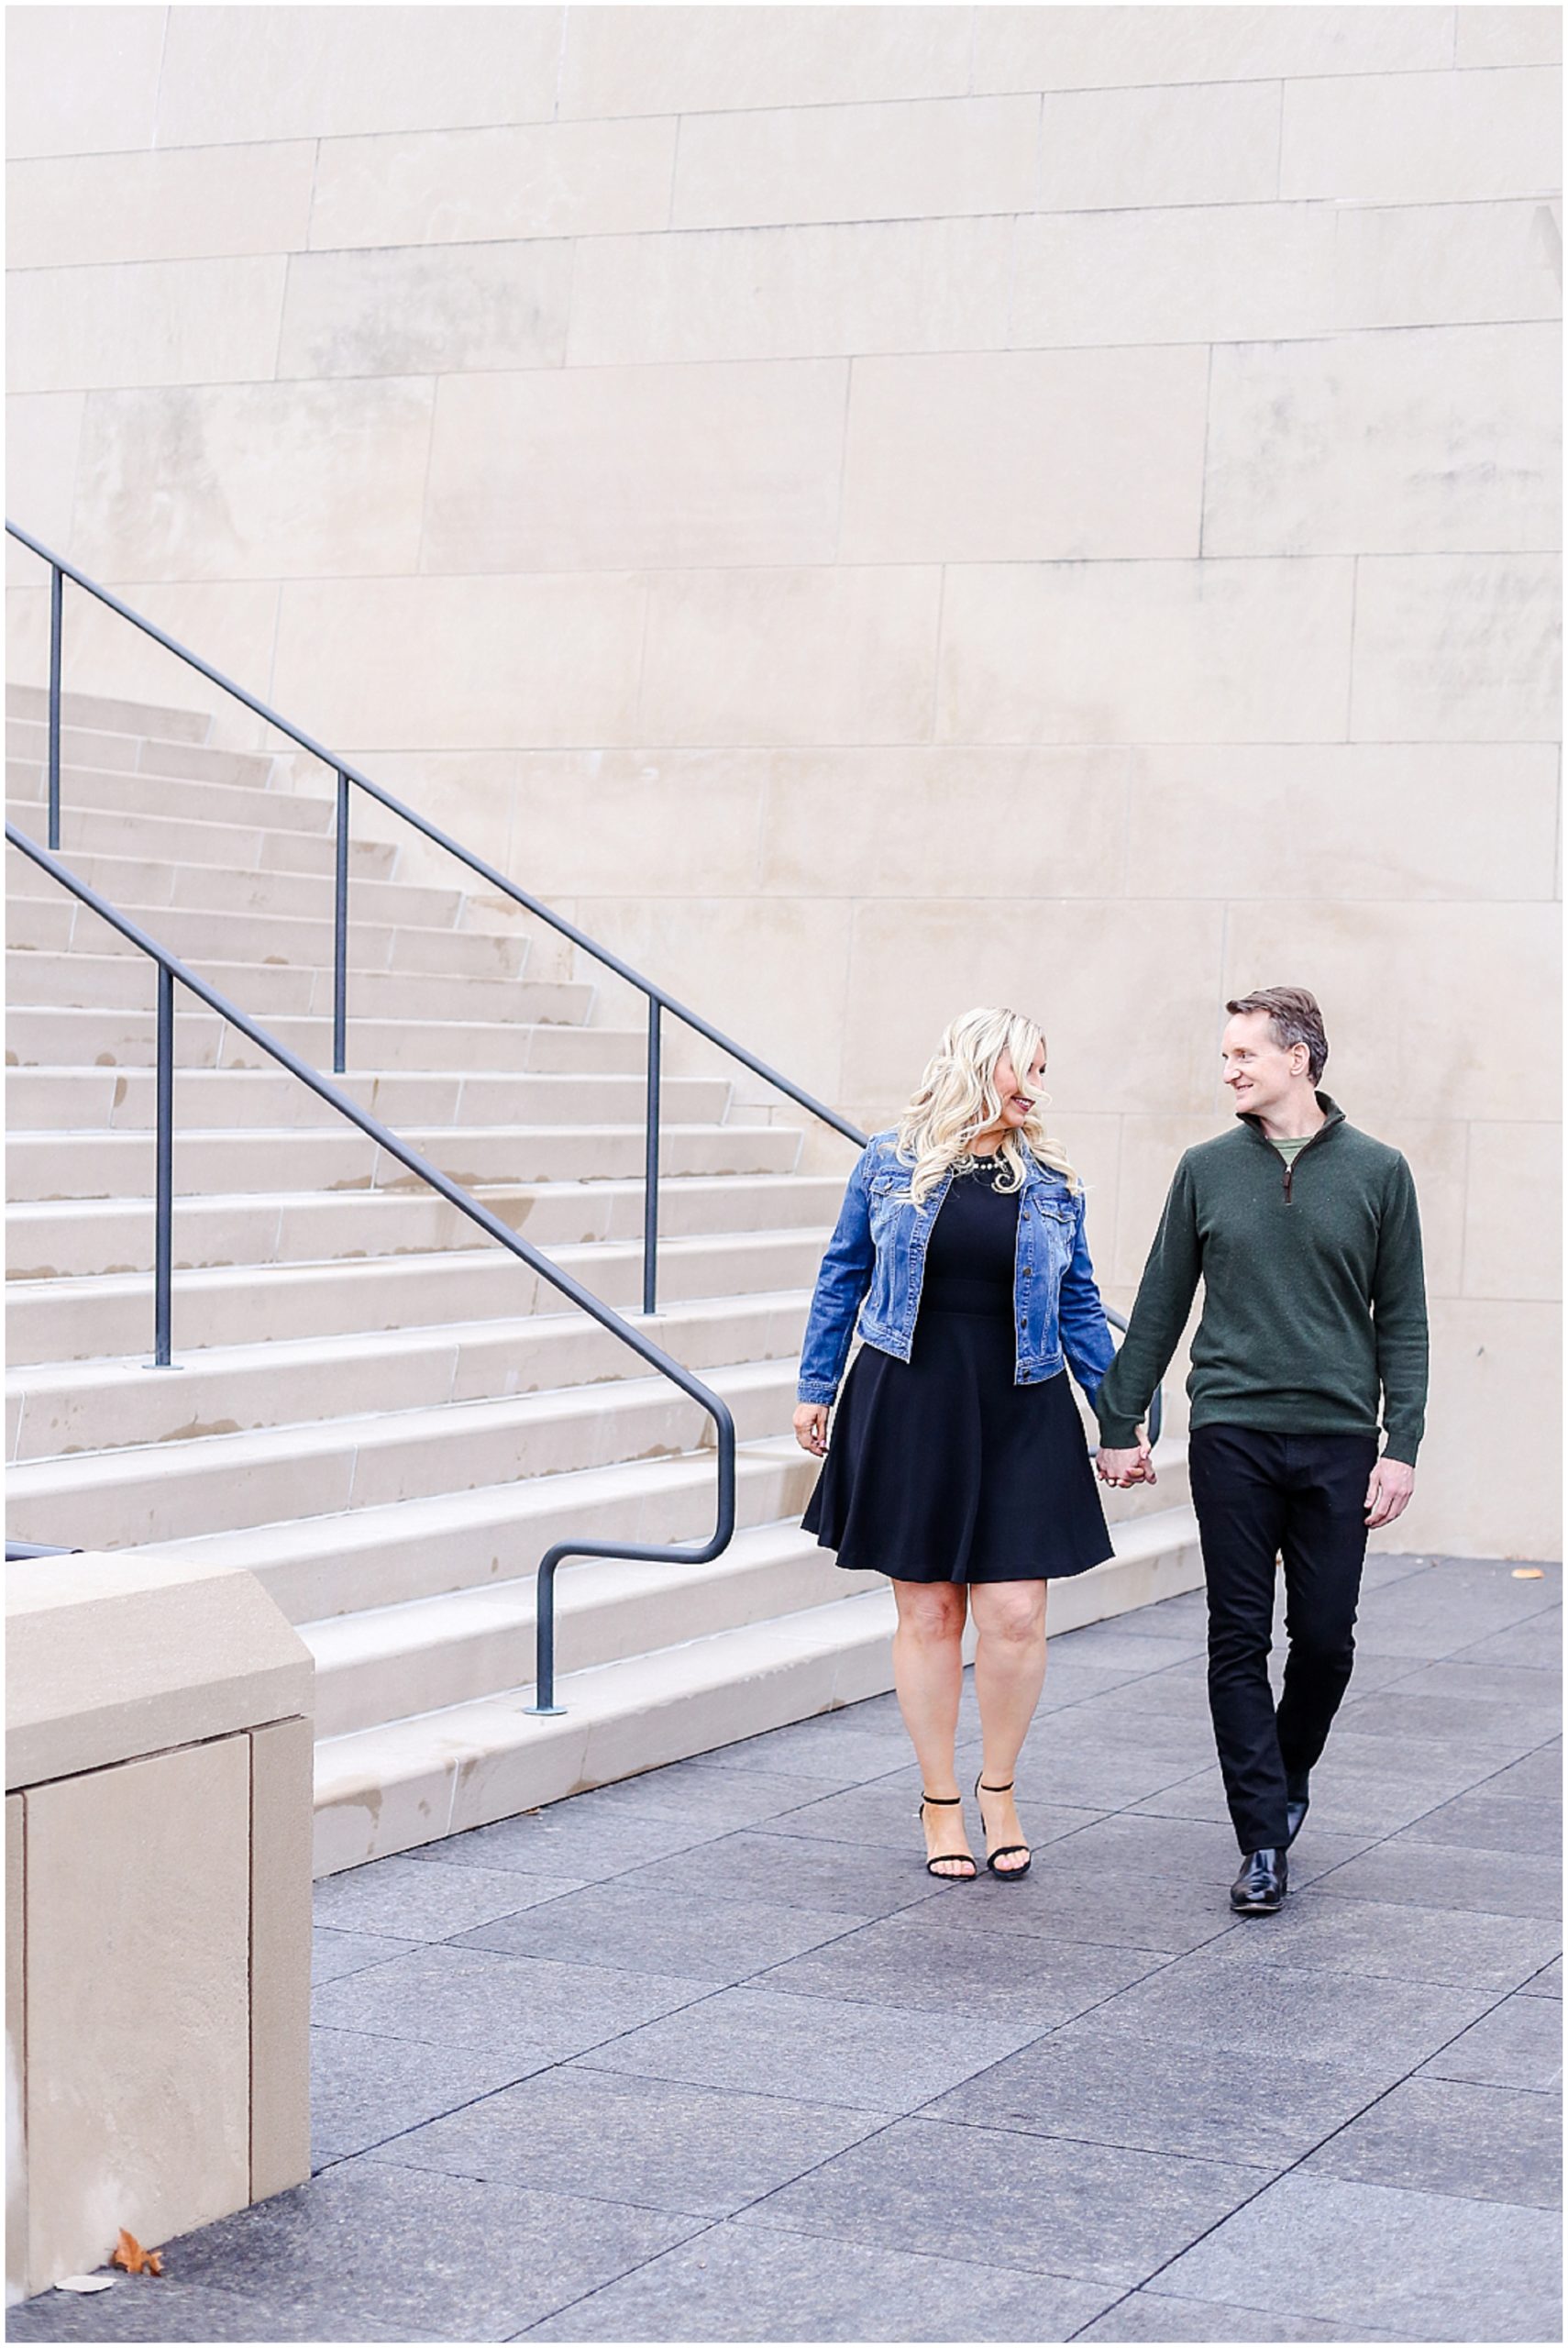 walking while holding hands for their engagement portraits kansas city